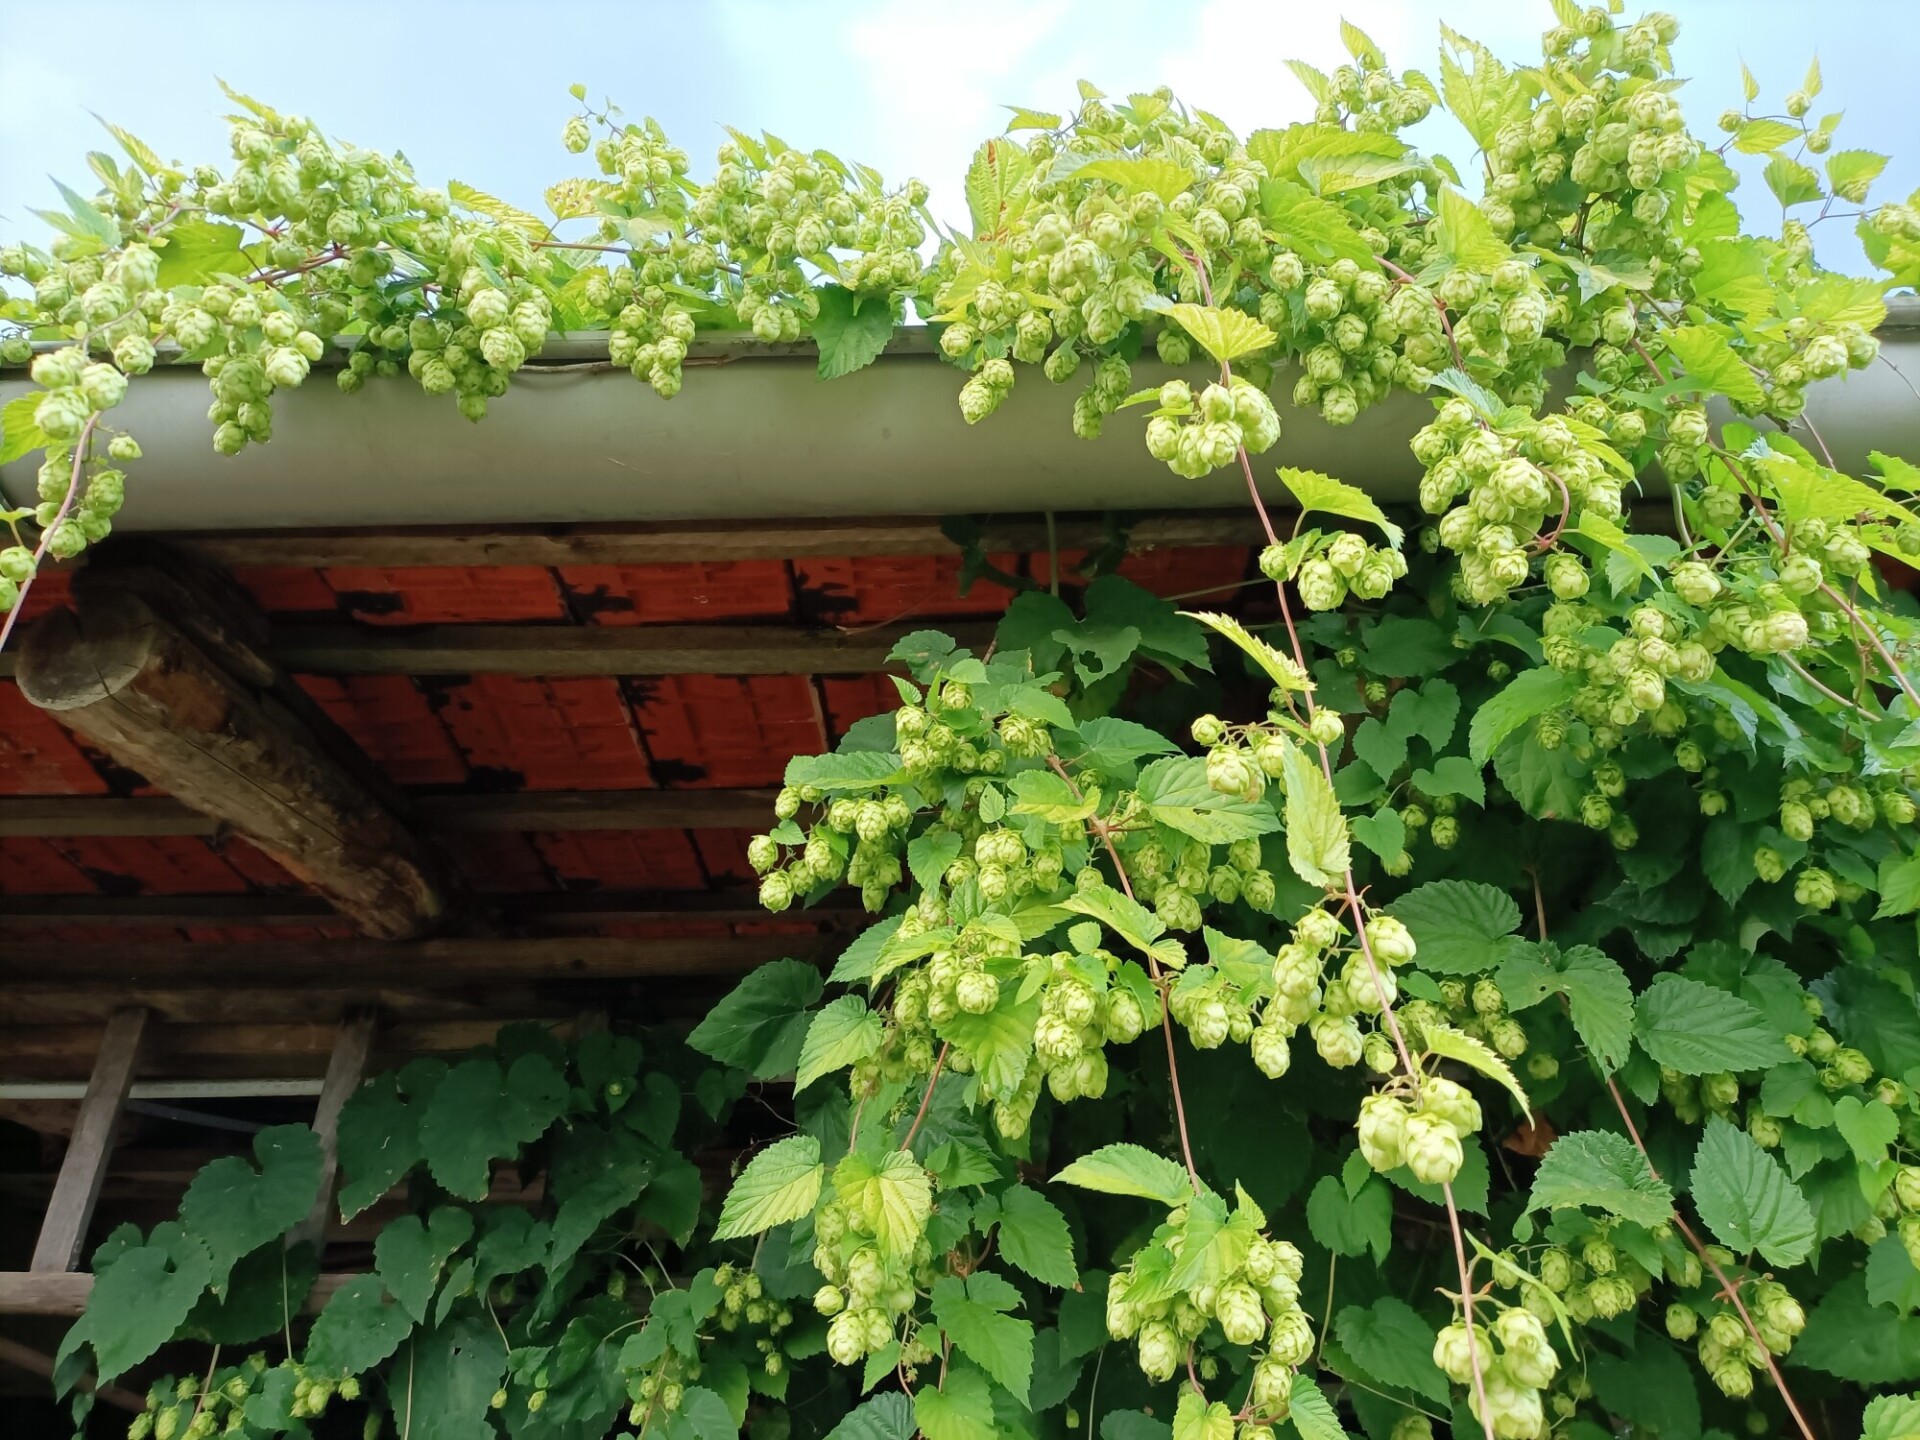 Hops growing on a shed